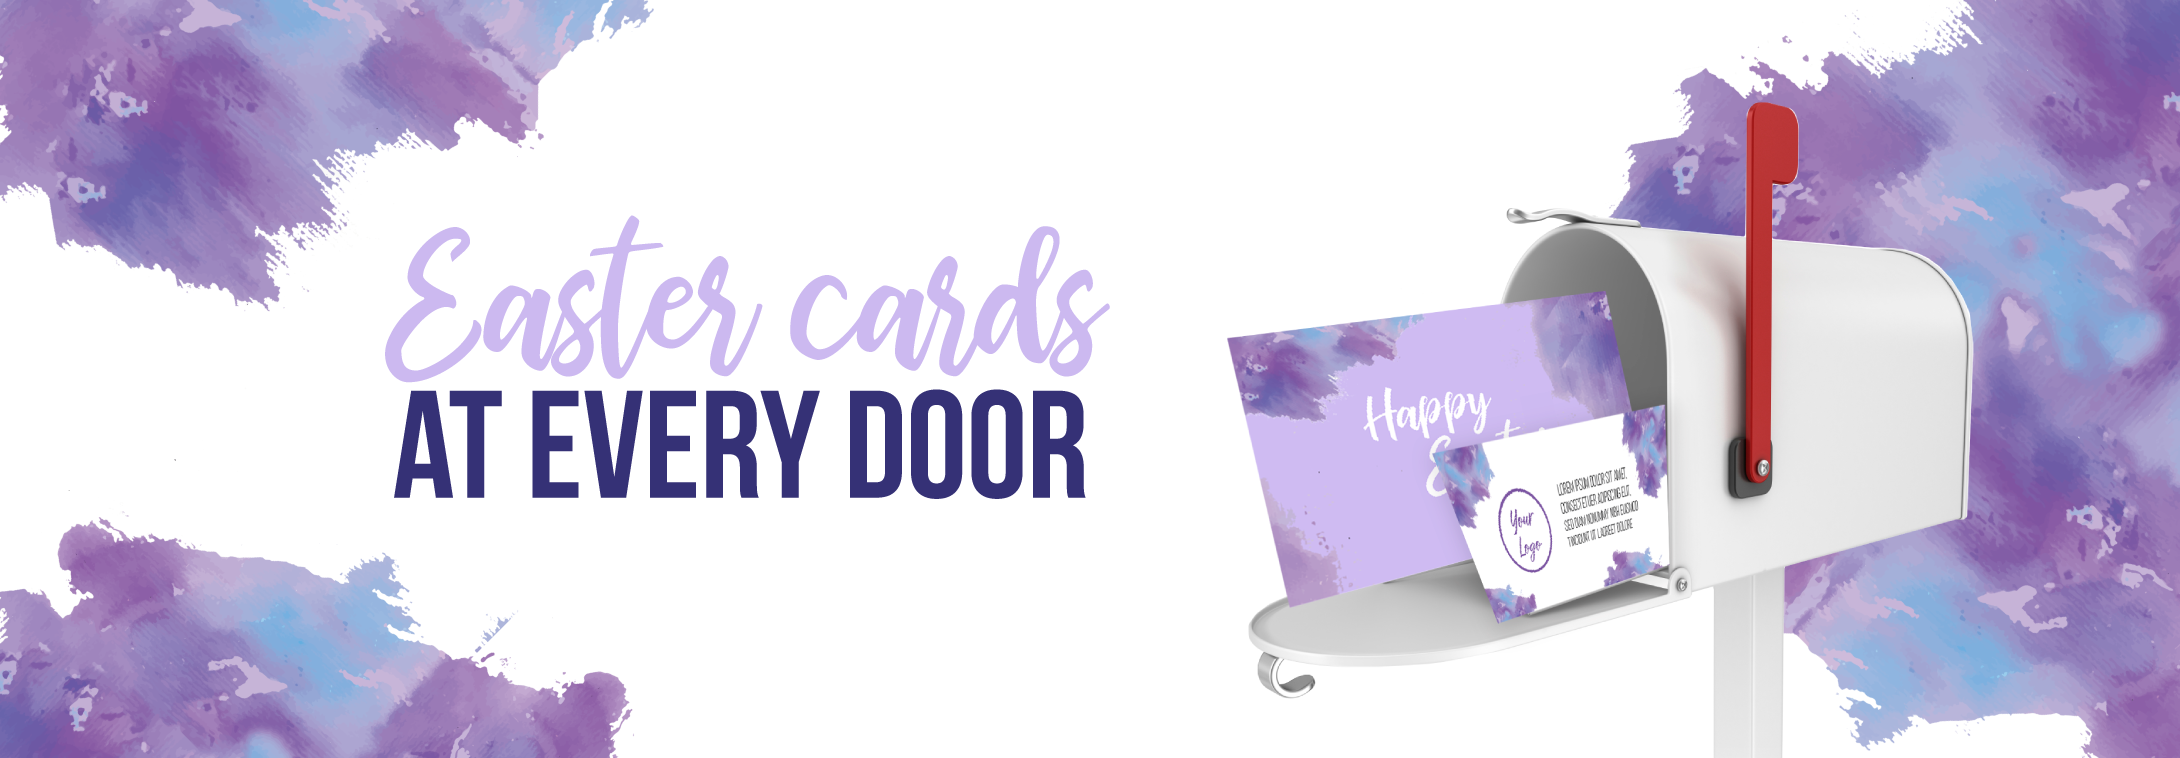 Easter cards at every door